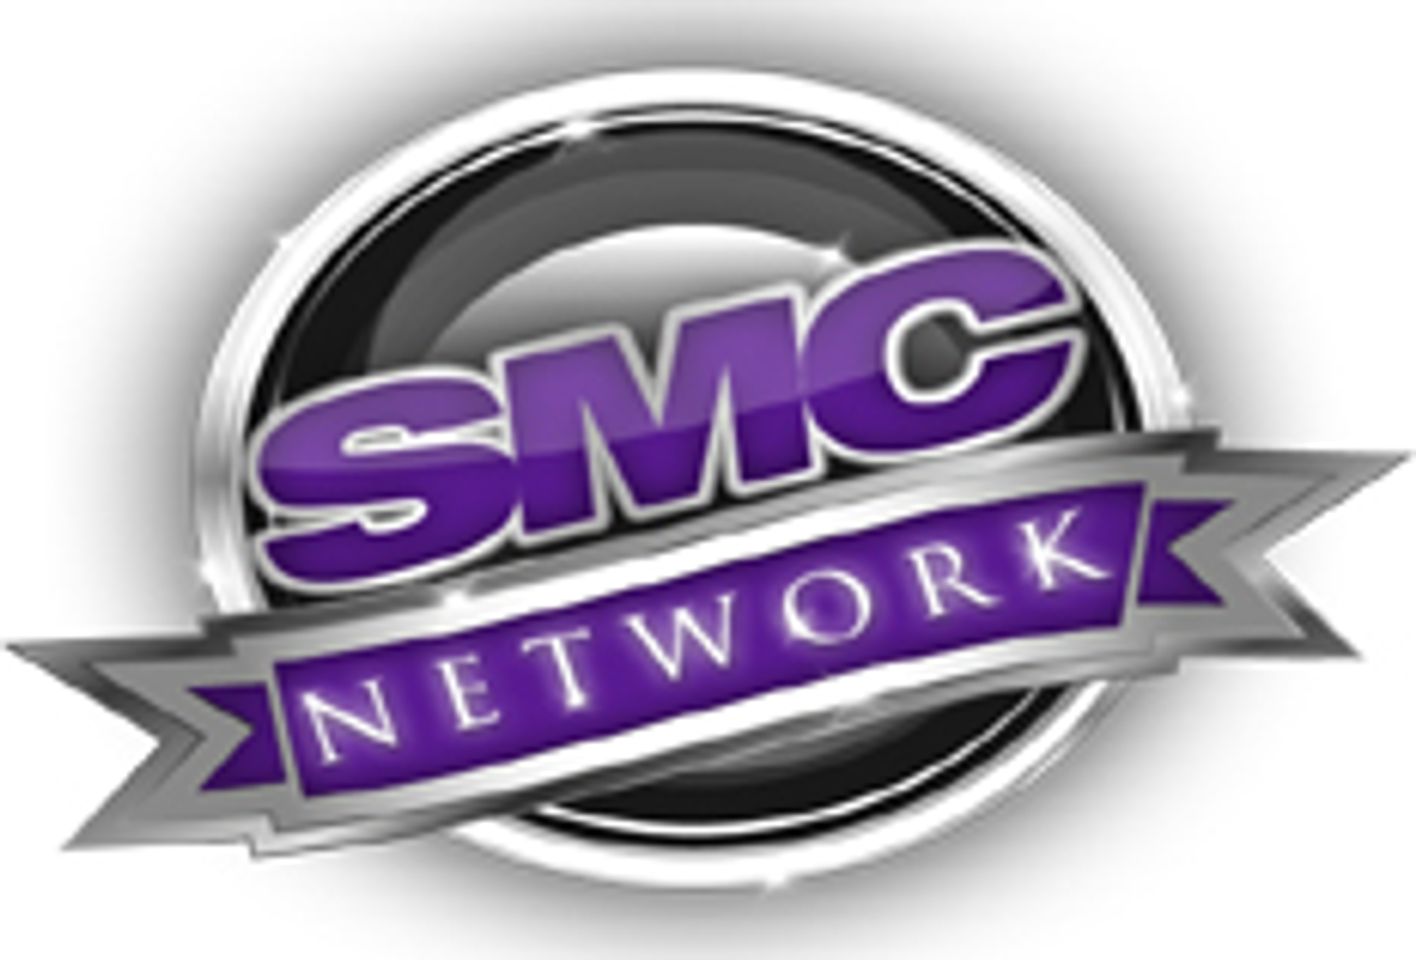 SMCLiveCams.com Offers Savings Incentive This Weekend